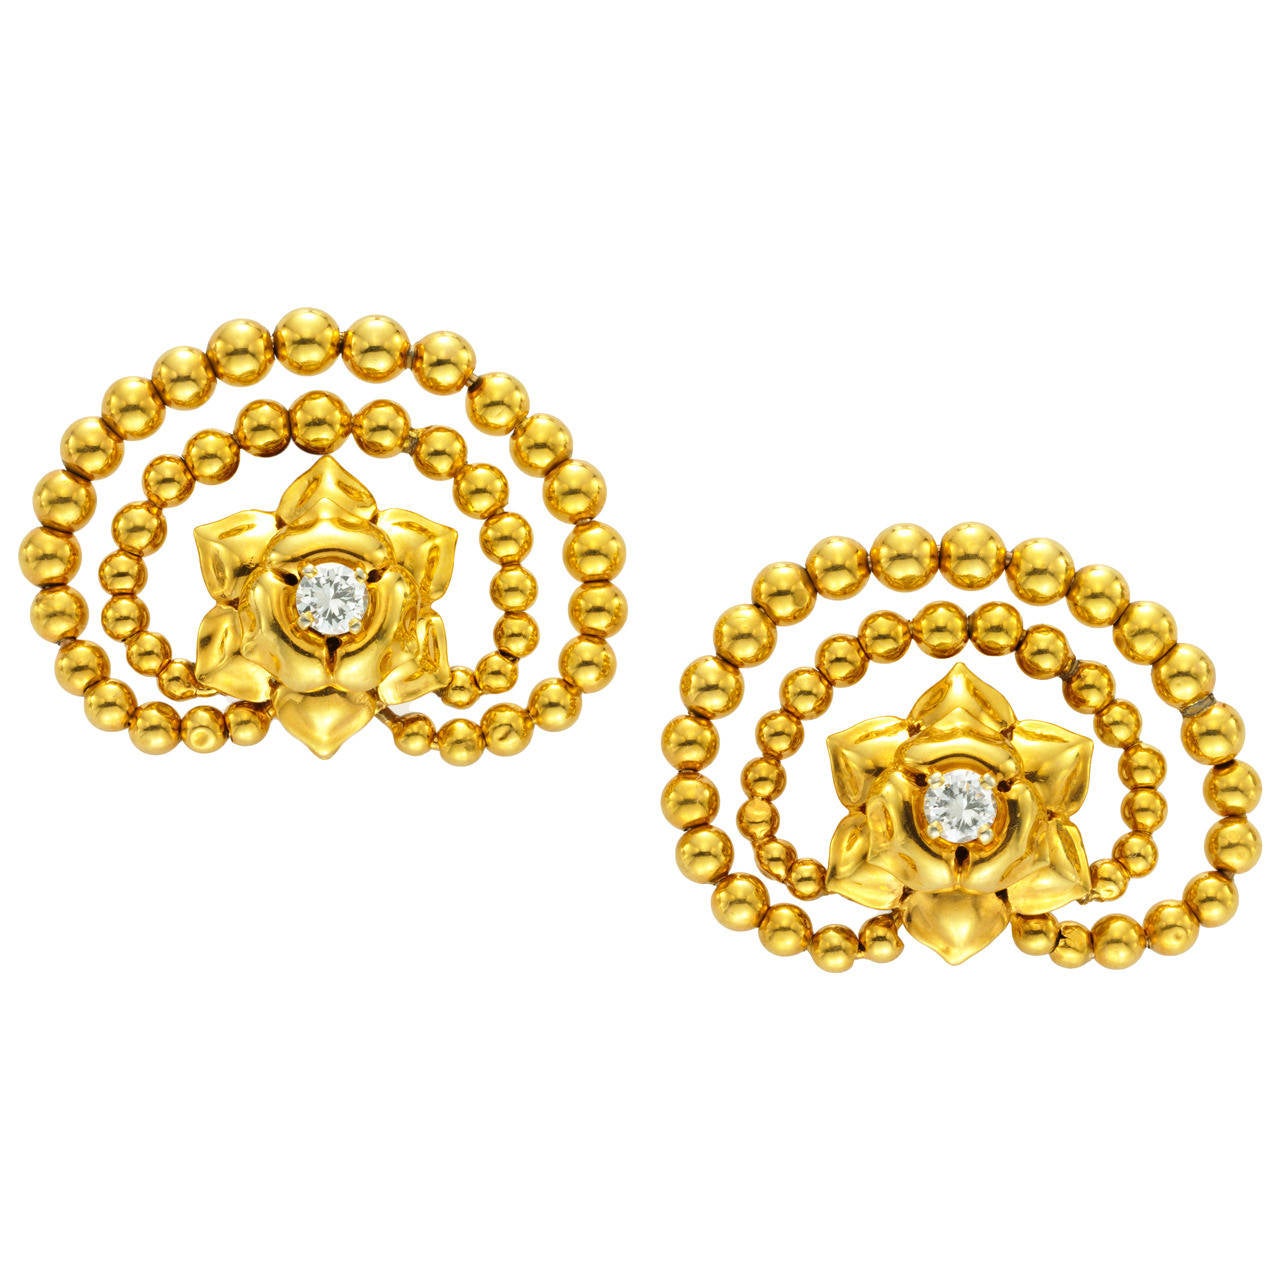 Cartier, A Pair of Retro Gold and Diamond Ear Clips For Sale